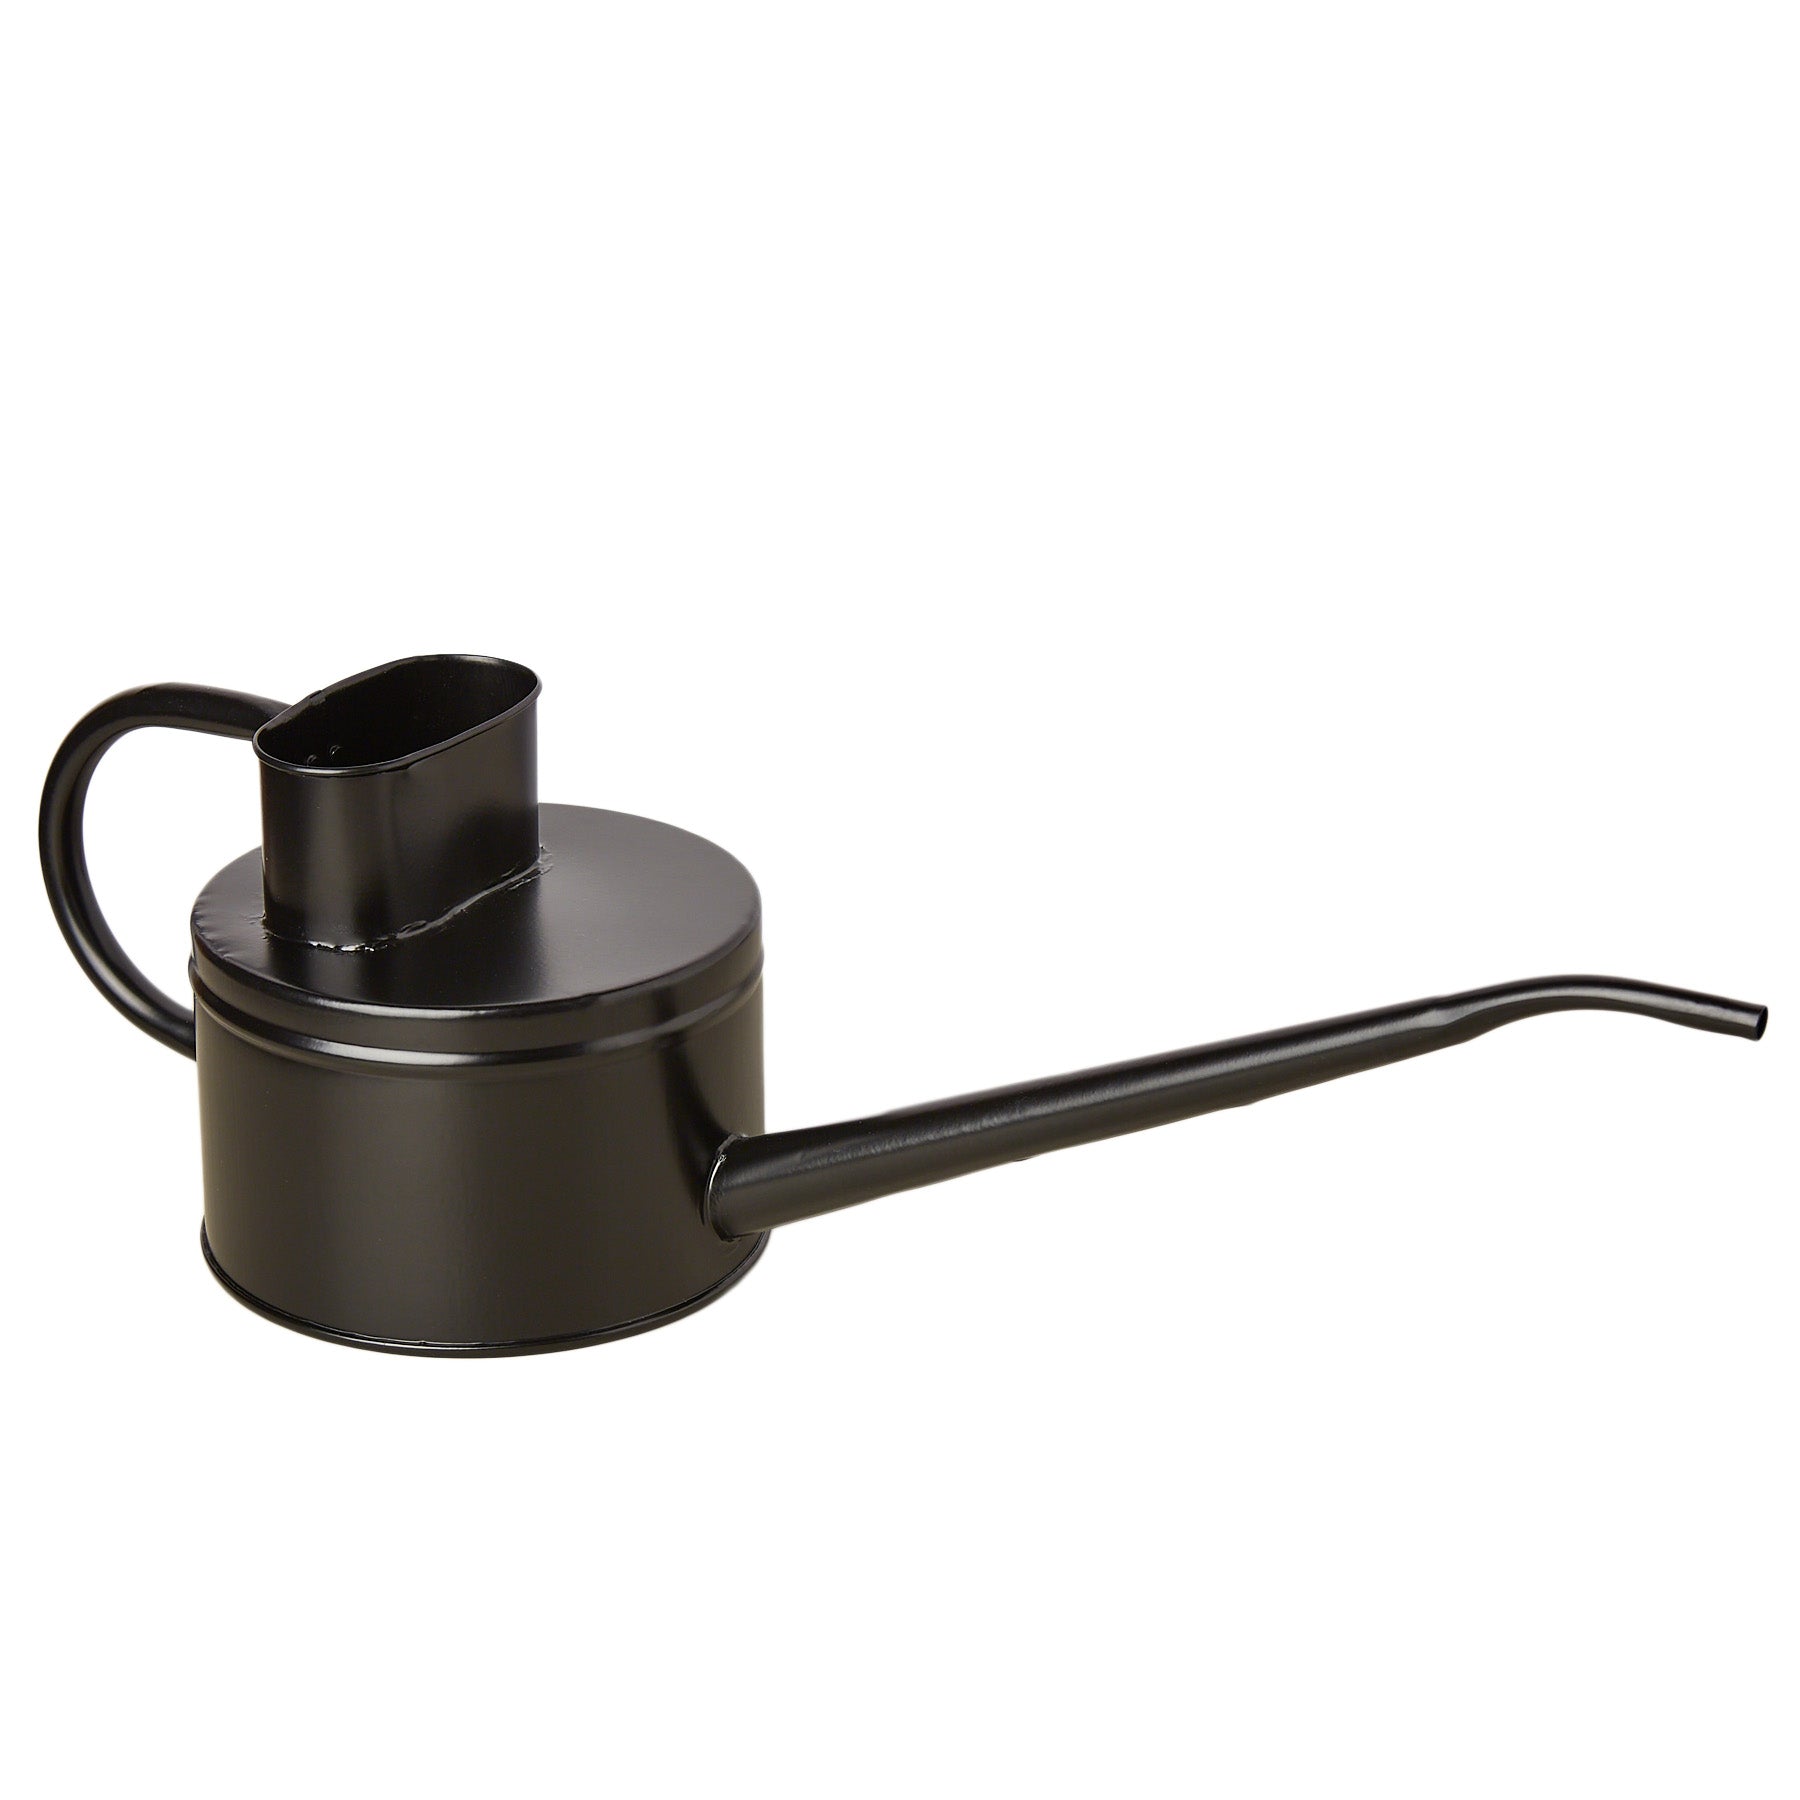 A black metal watering can on a white background.